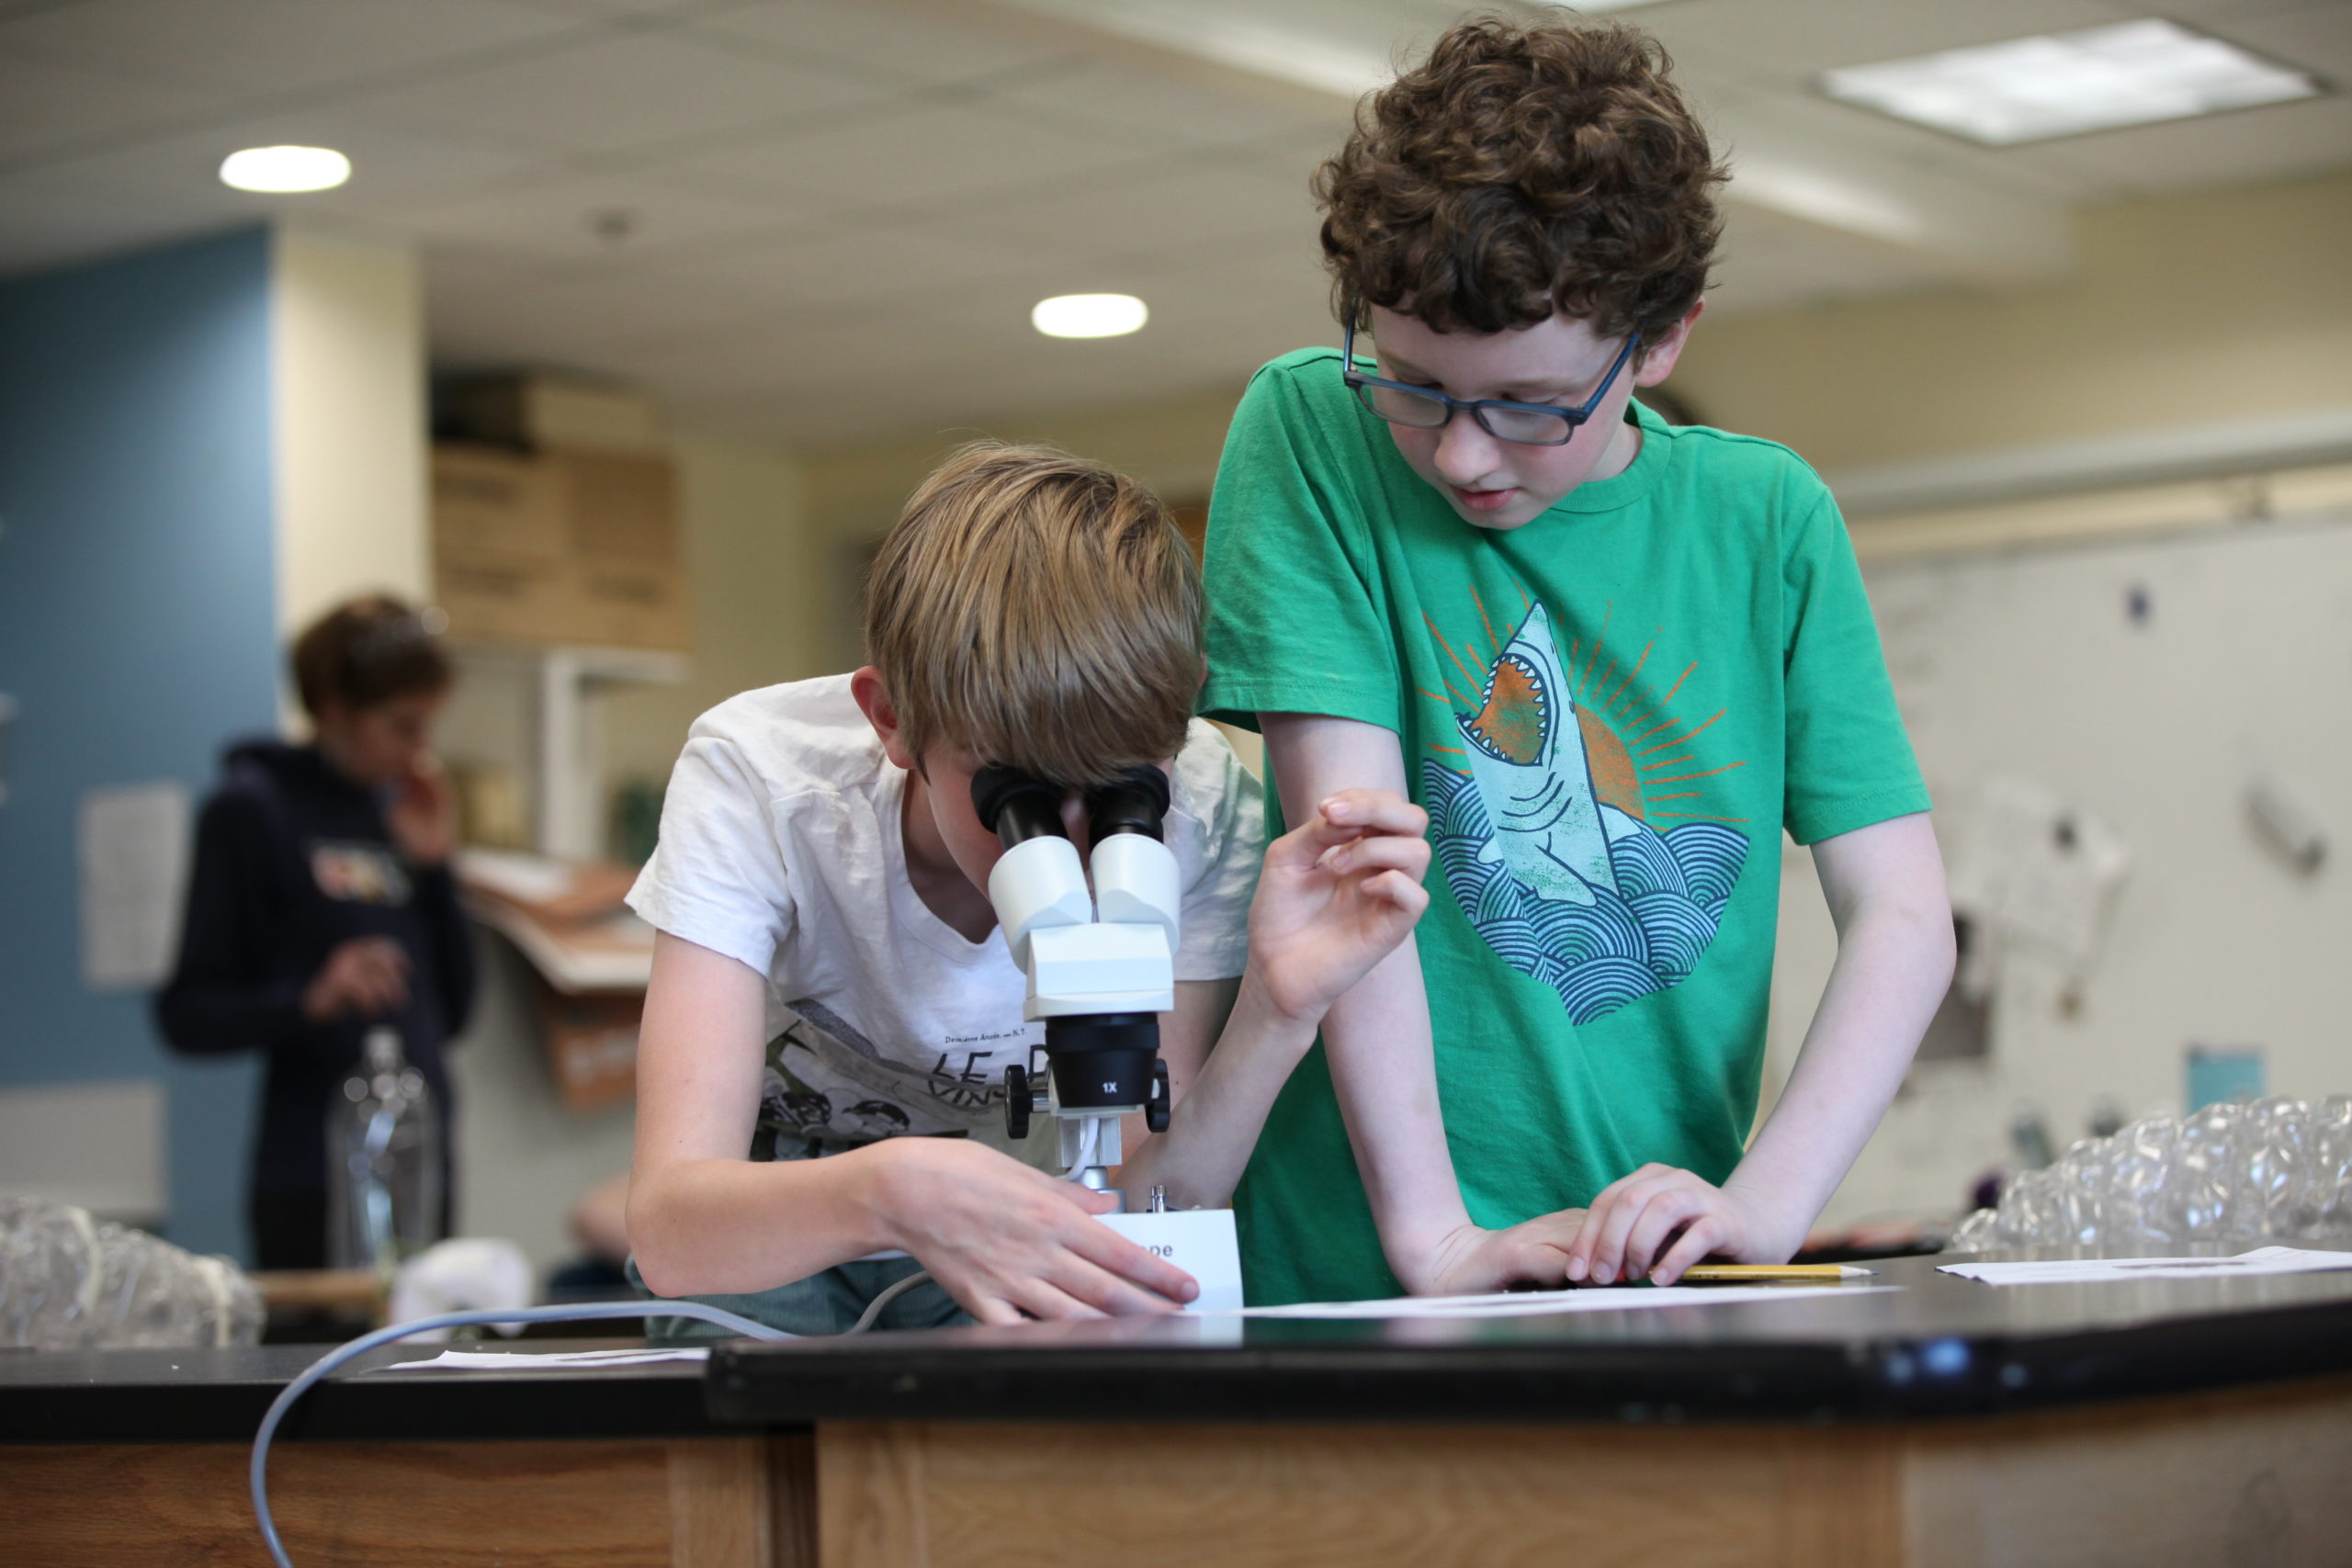 Middle school students work together during a science lab at Cambridge Friends School